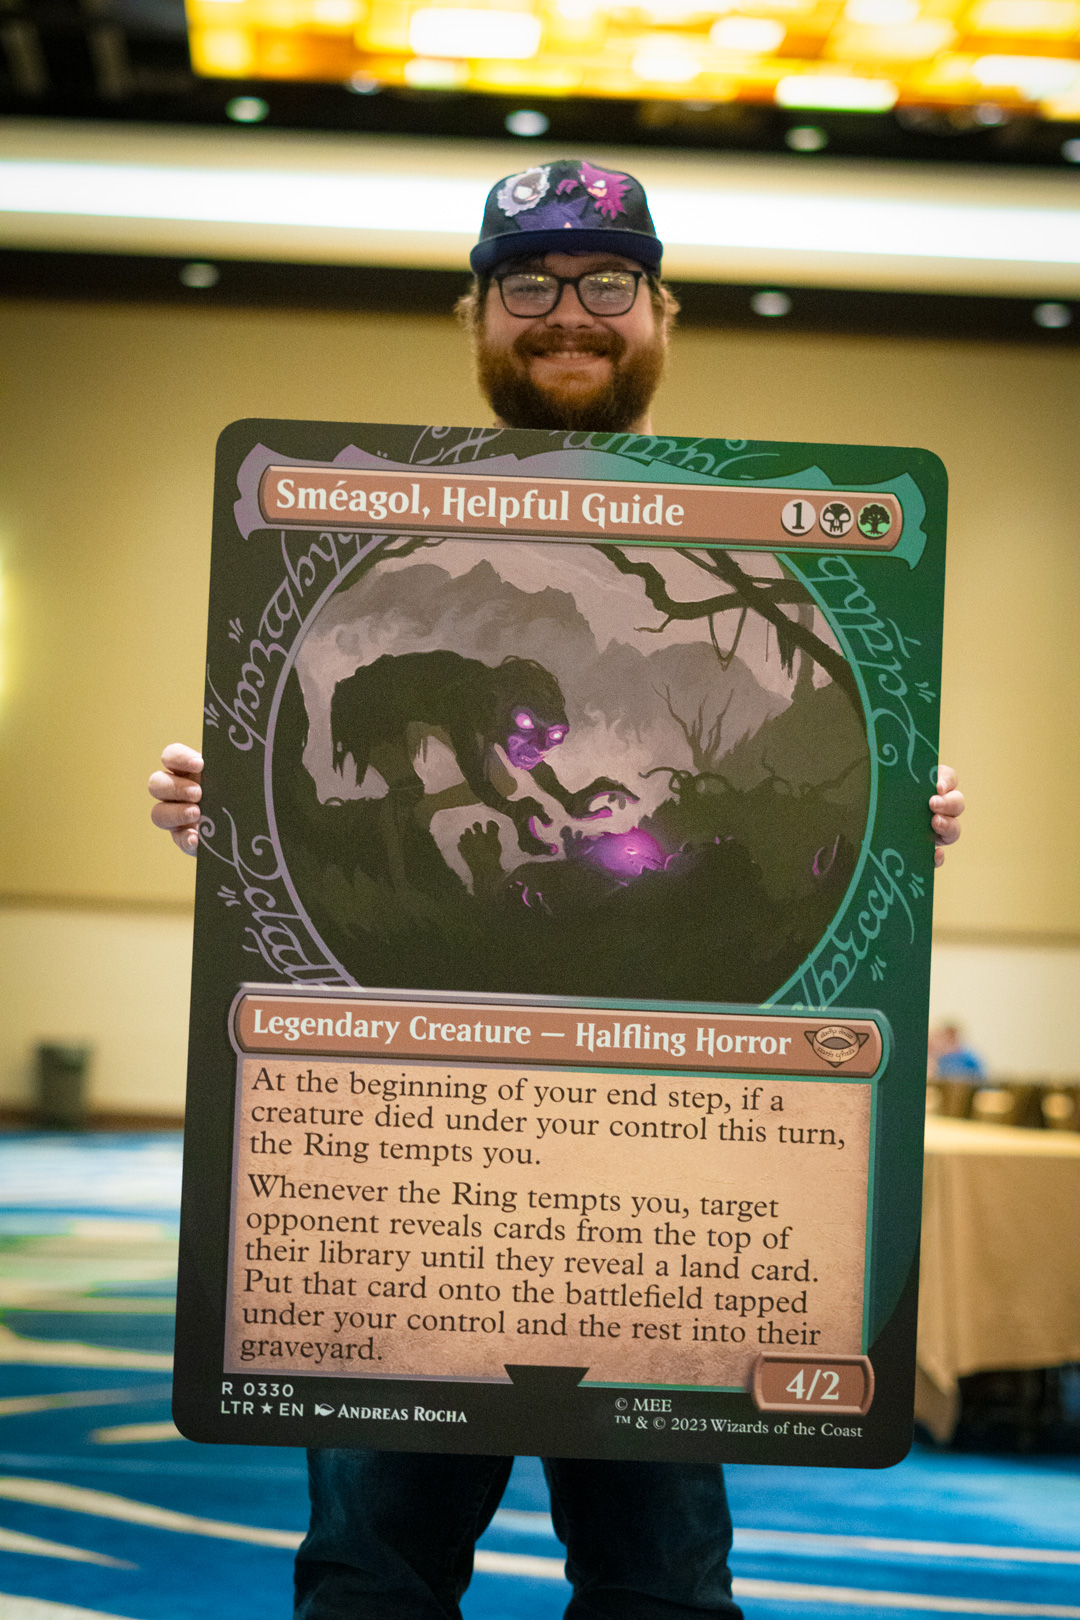 Player holding an oversized card of Smeagol, Helpful Guide